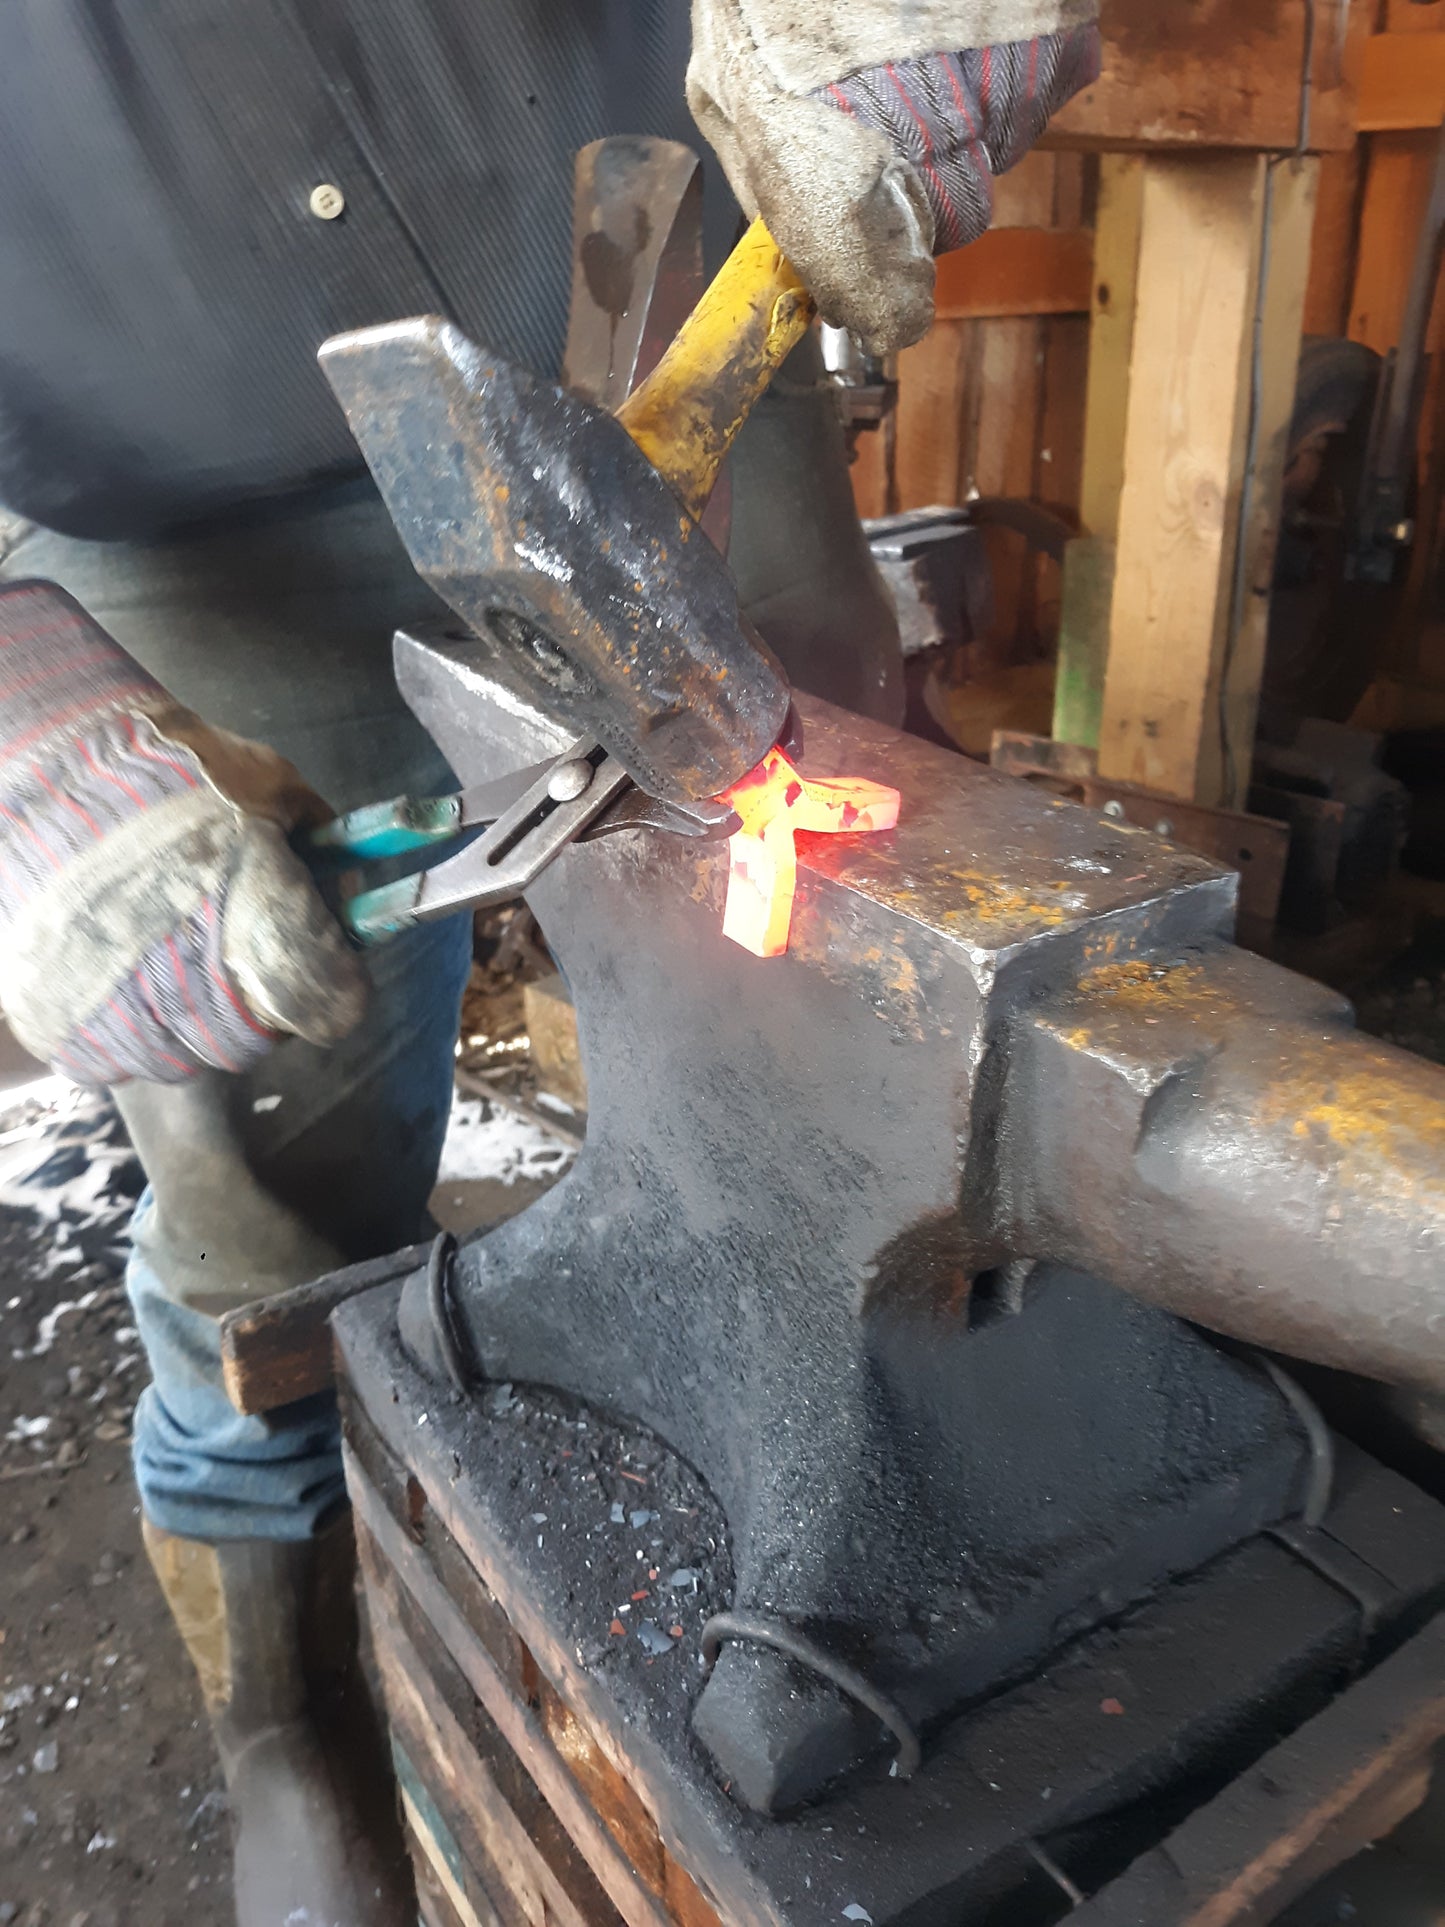 Our blacksmith shapes a red hot piece of metal with a large hammer and anvil. This will become a bracket for one of our hand forged ring handles.